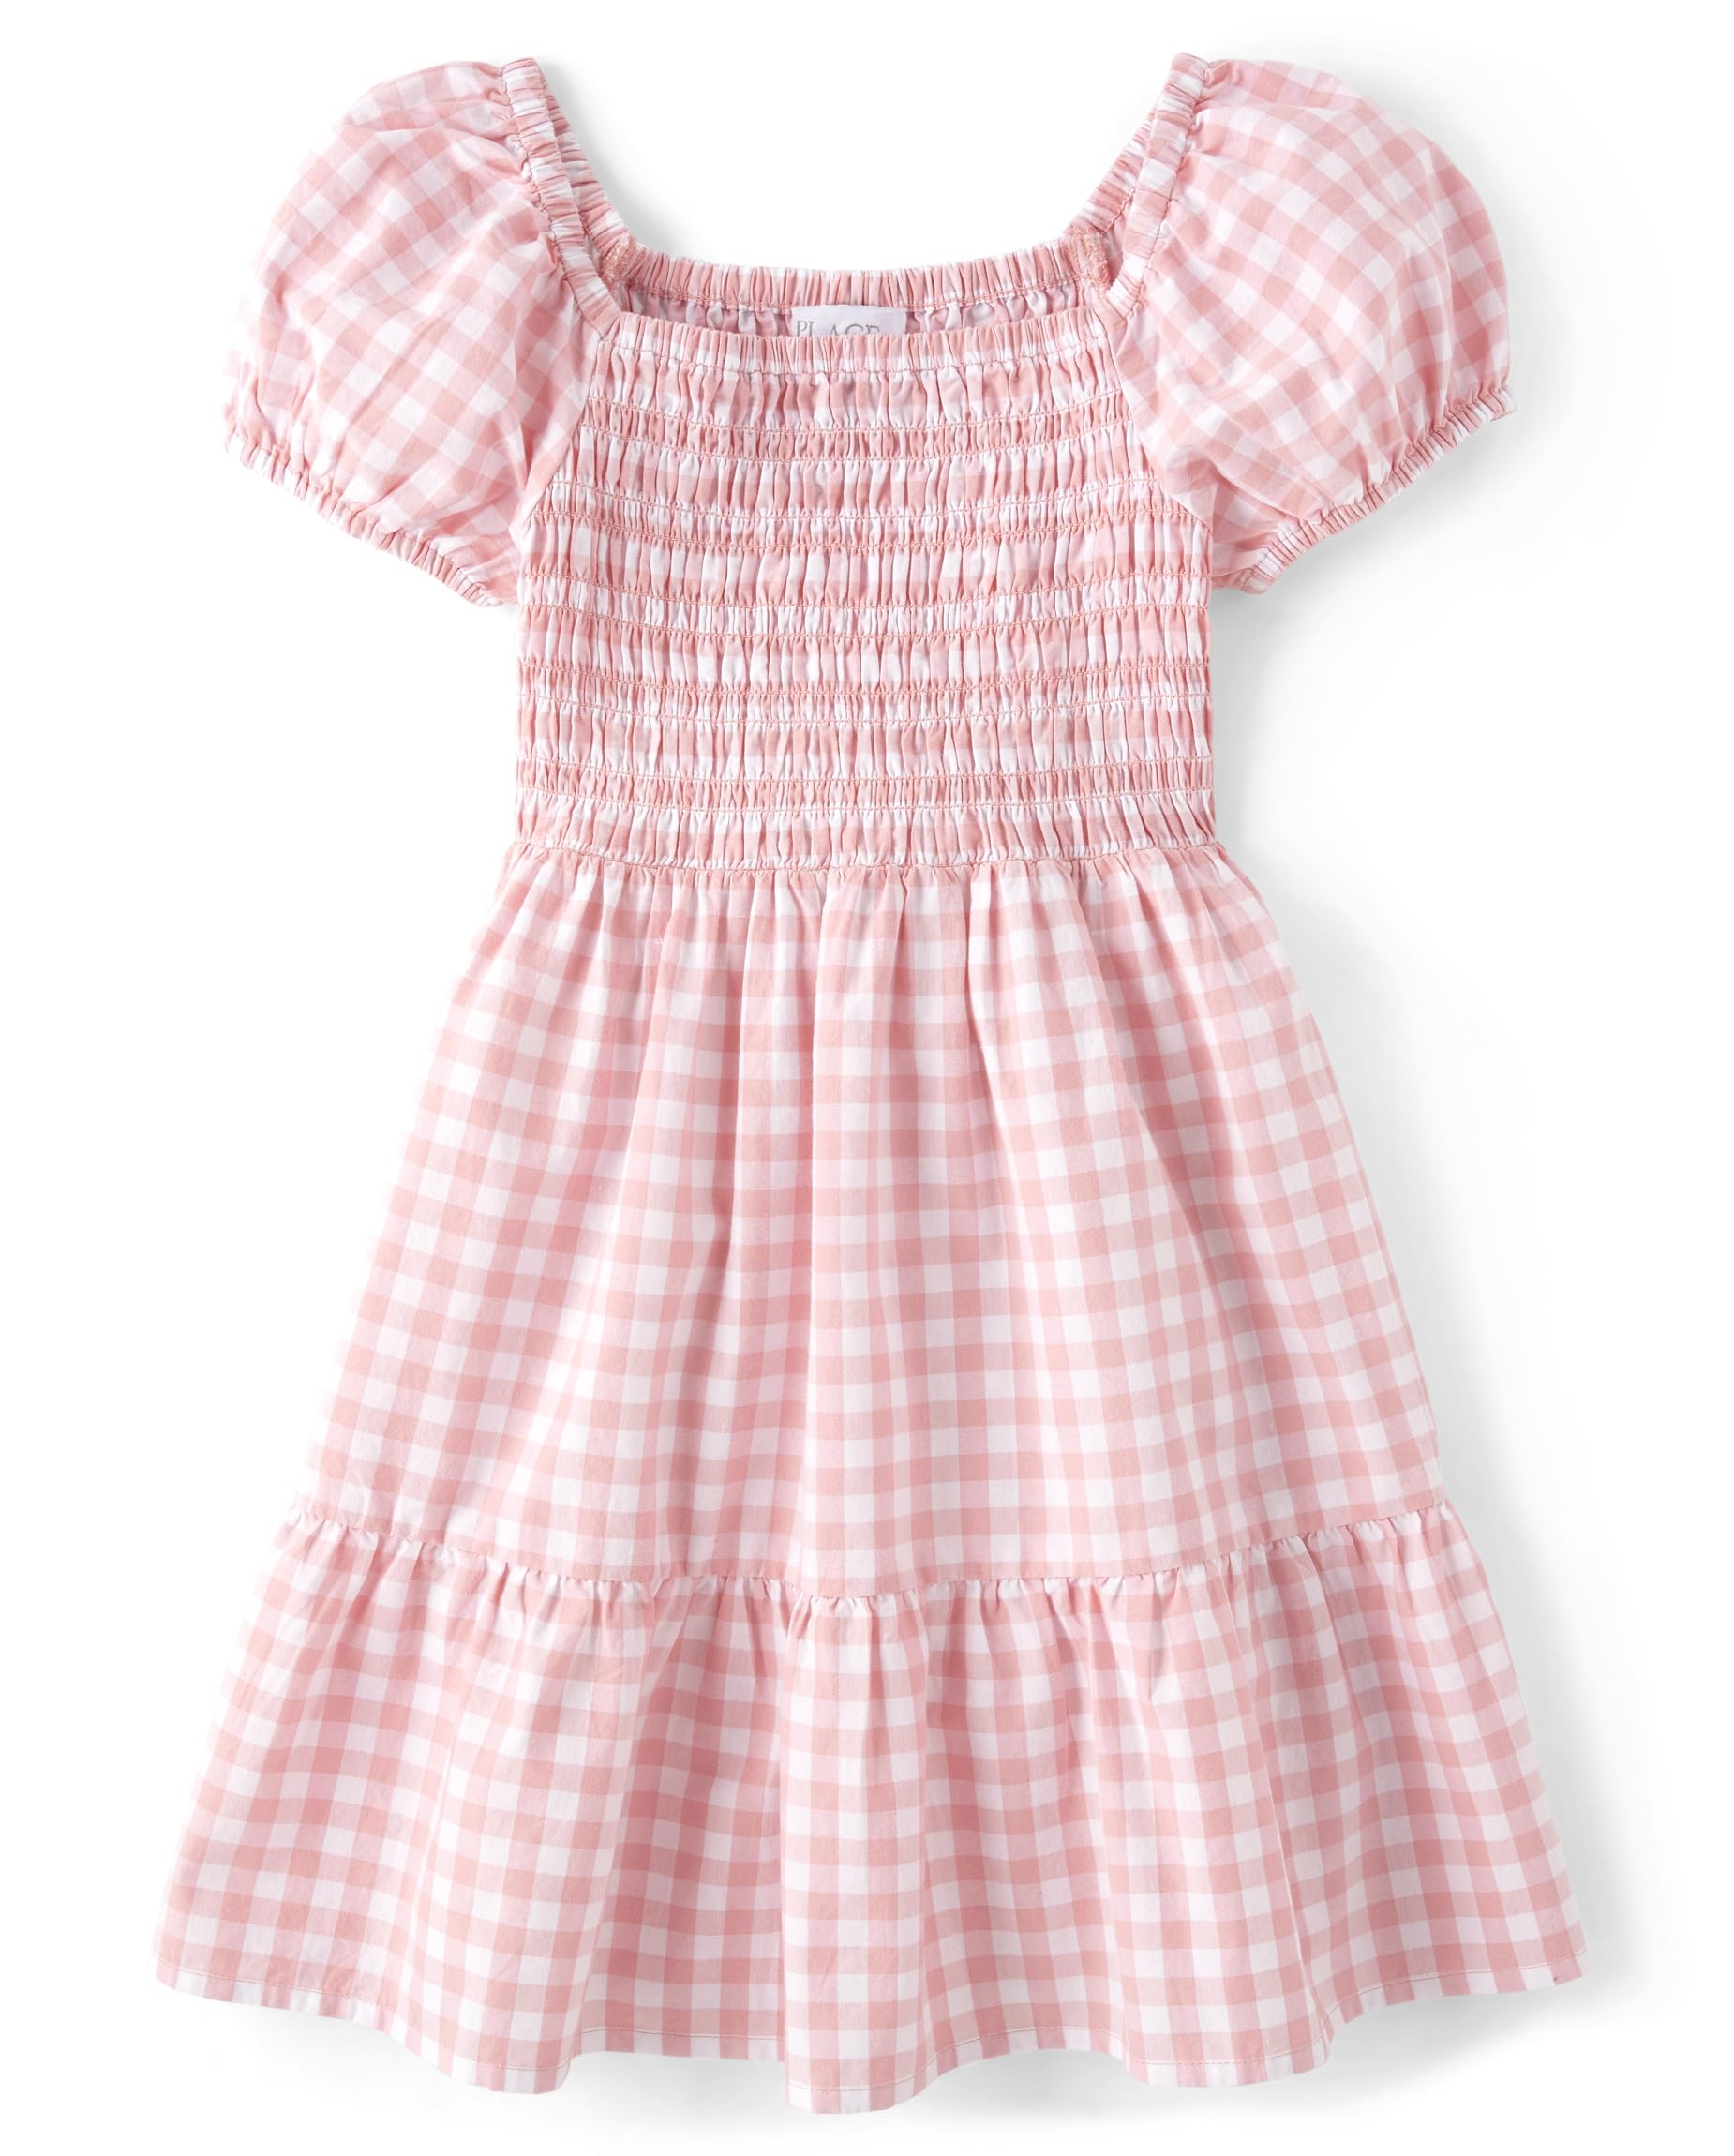 The Children's Place Baby Girls' Short Dressy Special Occasion Dresses, Pink Gingham Puff Sleeve, Medium